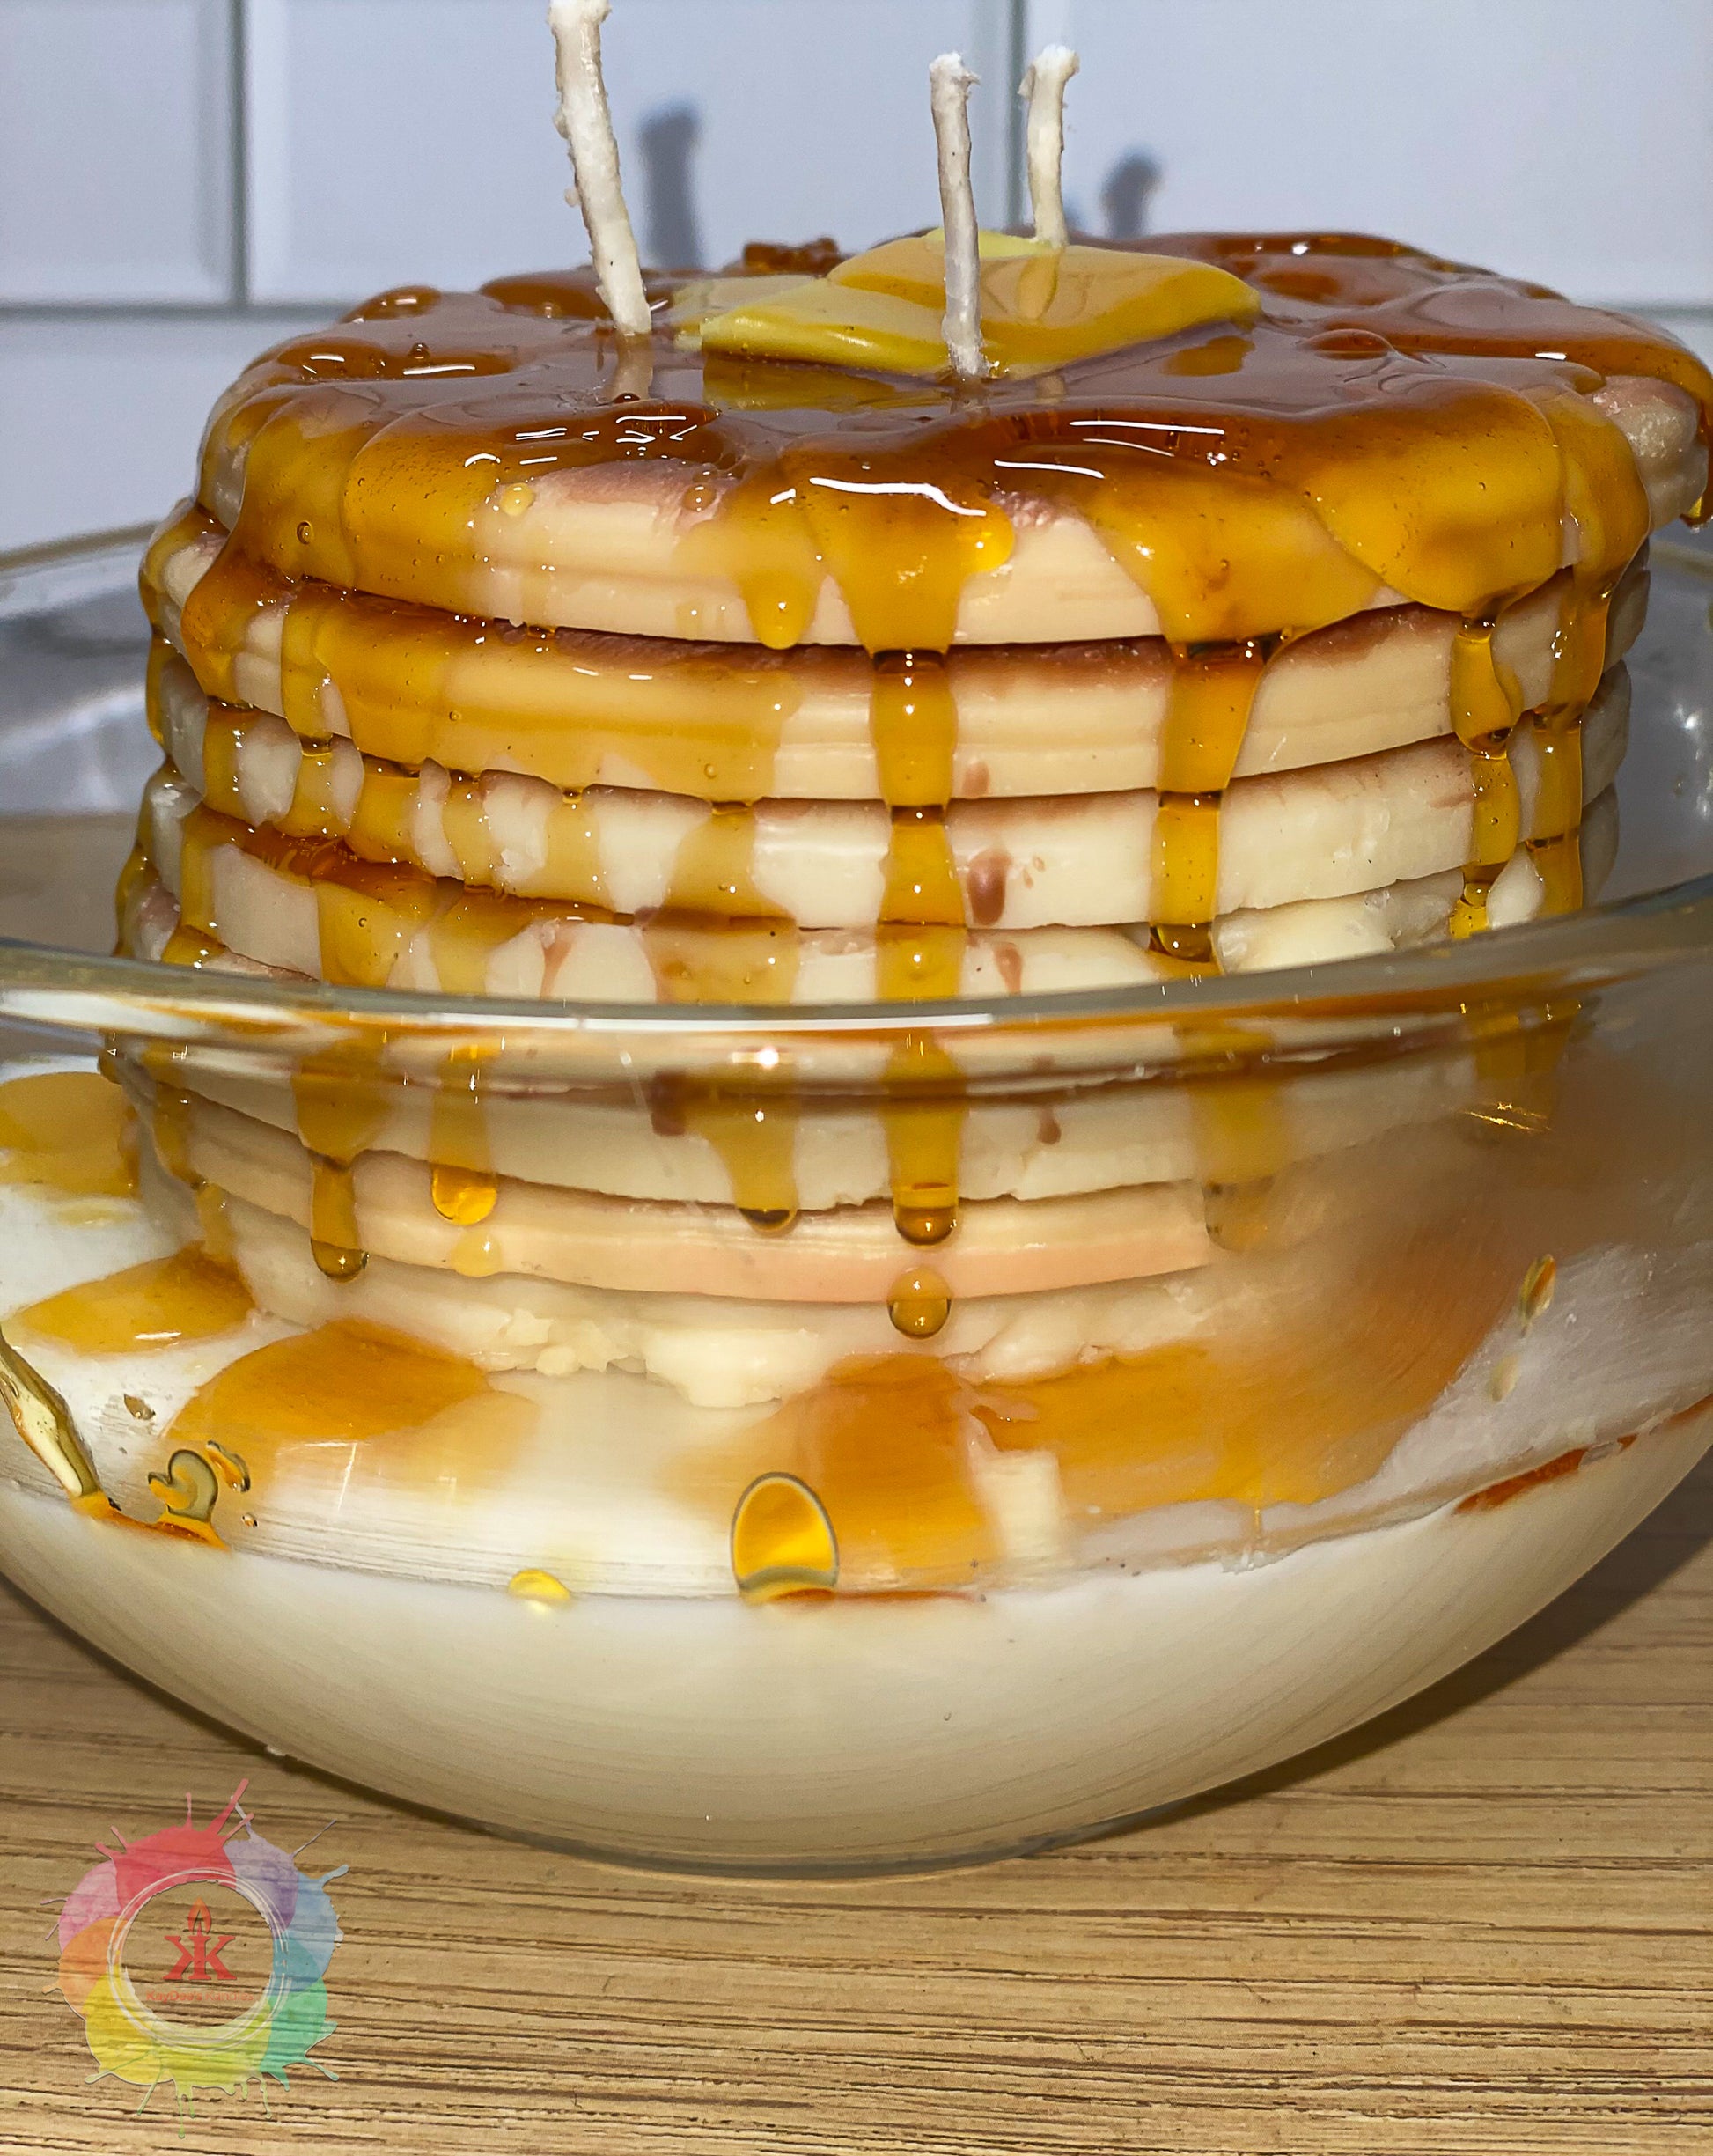 SOY CANDLE - PANCAKES – house of two trees